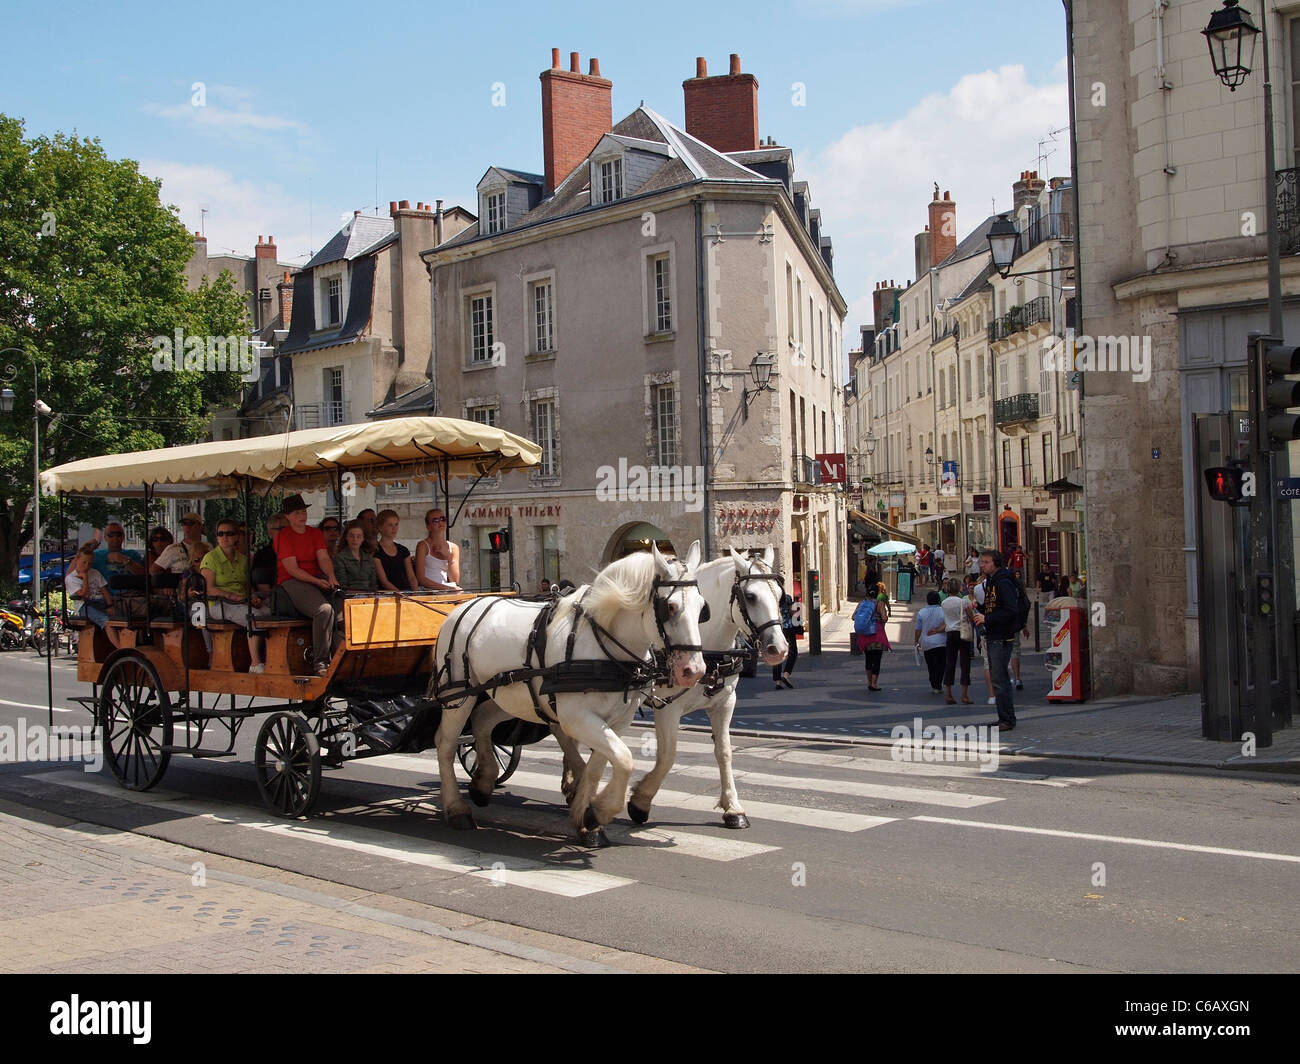 Horse and carriage with sightseeing tourists in the city center of Blois, Loire valley, France Stock Photo